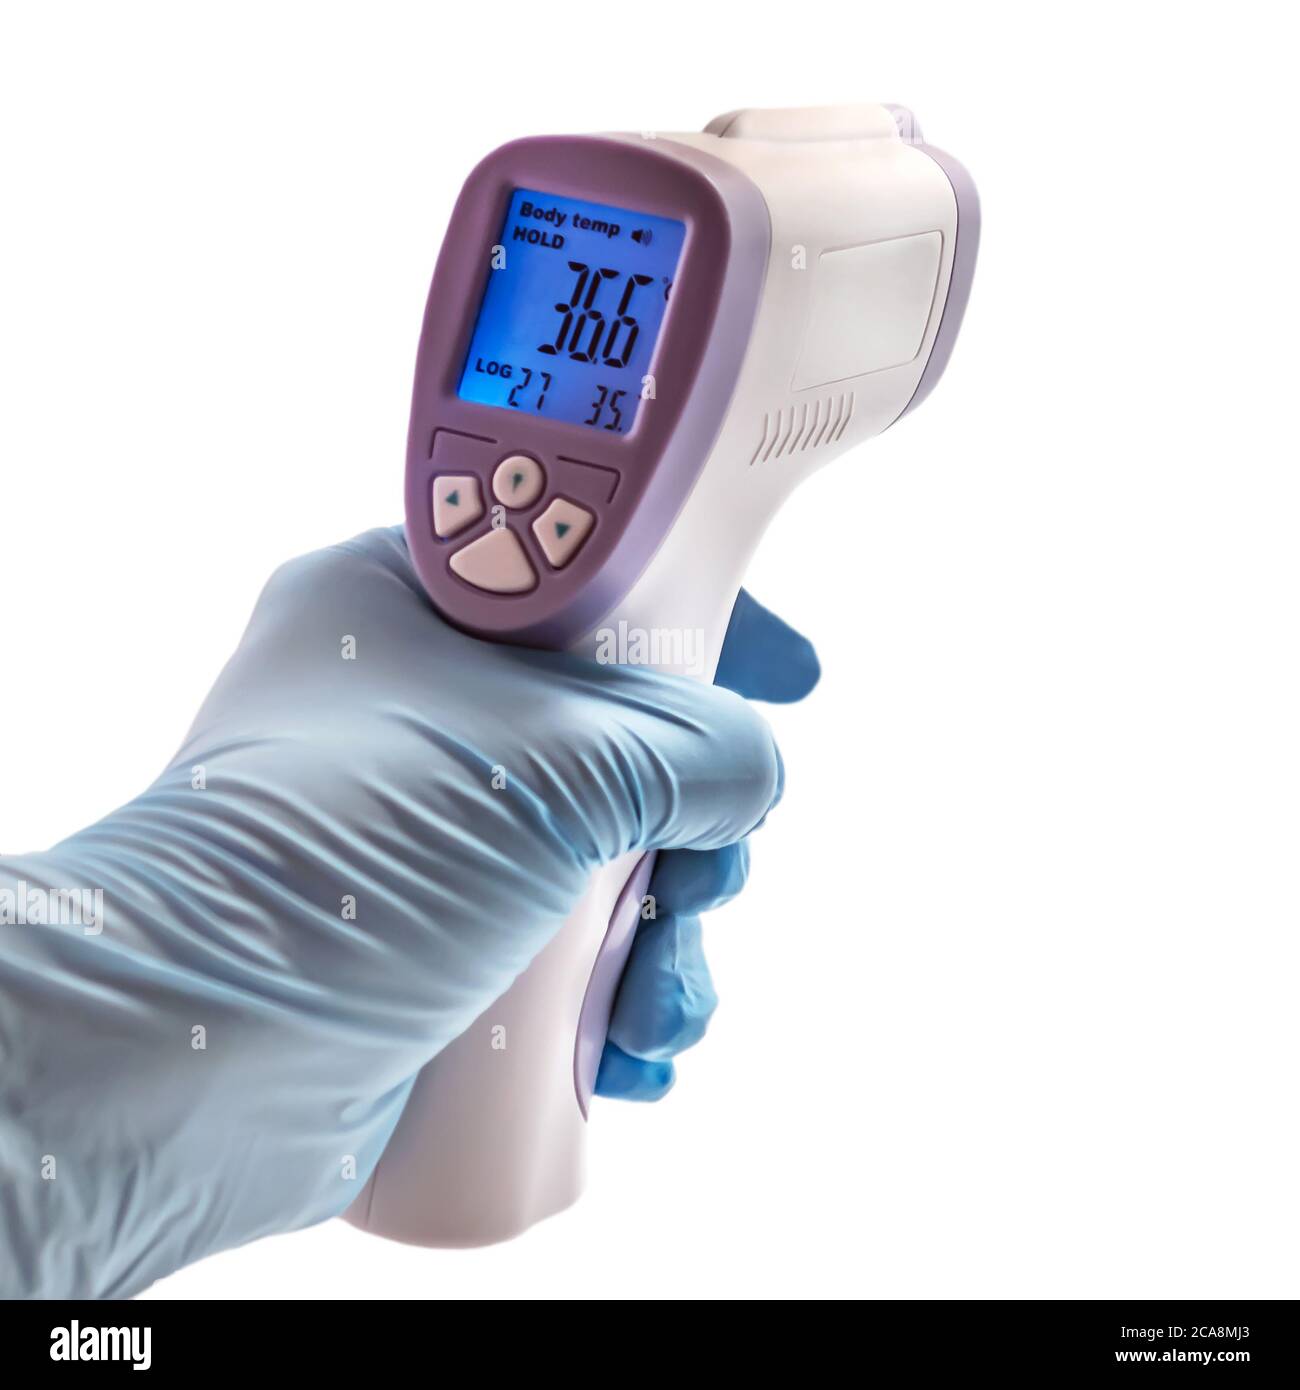 Thermometer Gun Isometric Medical Digital Non-Contact Infrared Sight  Handheld Forehead Readings. Temperature Measurement Device isolated on  white back Stock Photo - Alamy